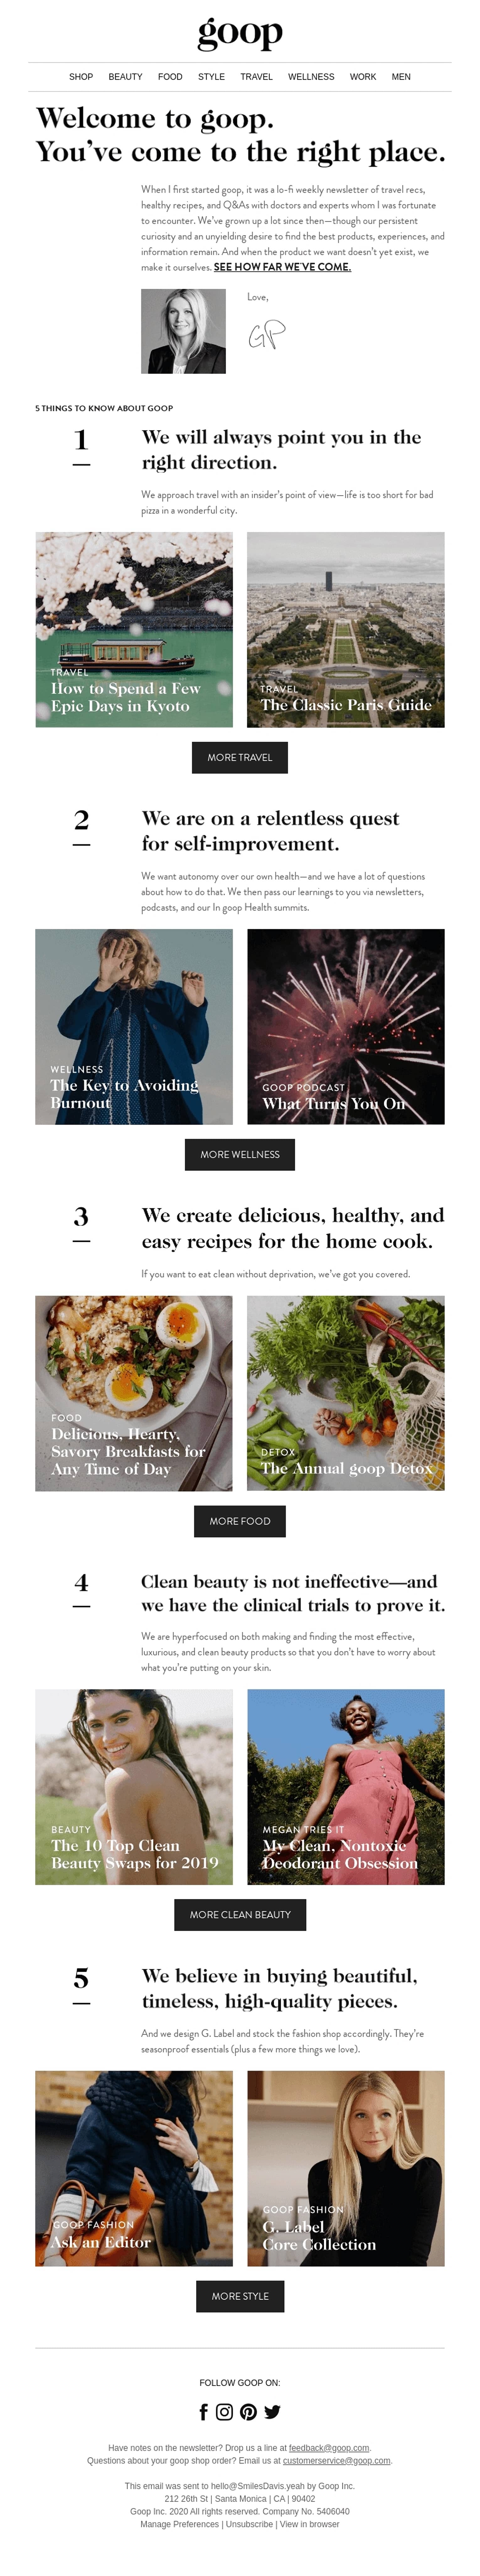 Goop email featuring an in-house macro influencer